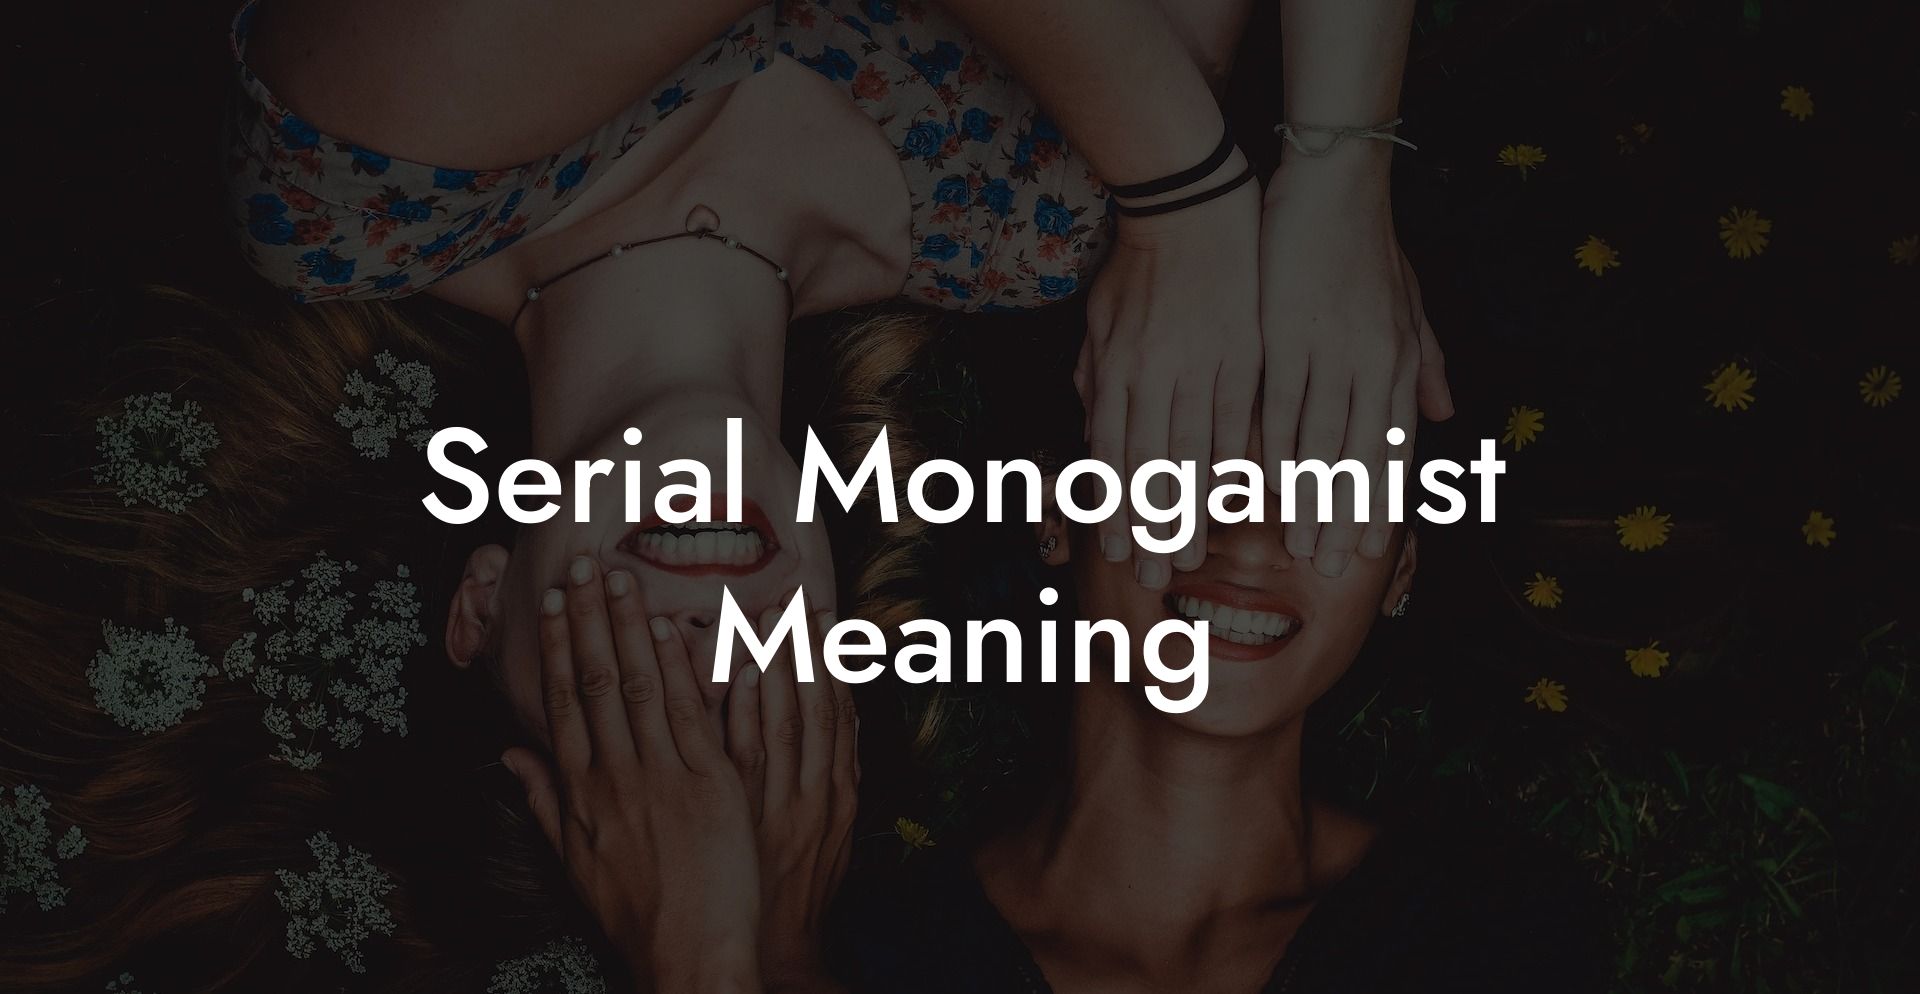 Serial Monogamist Meaning